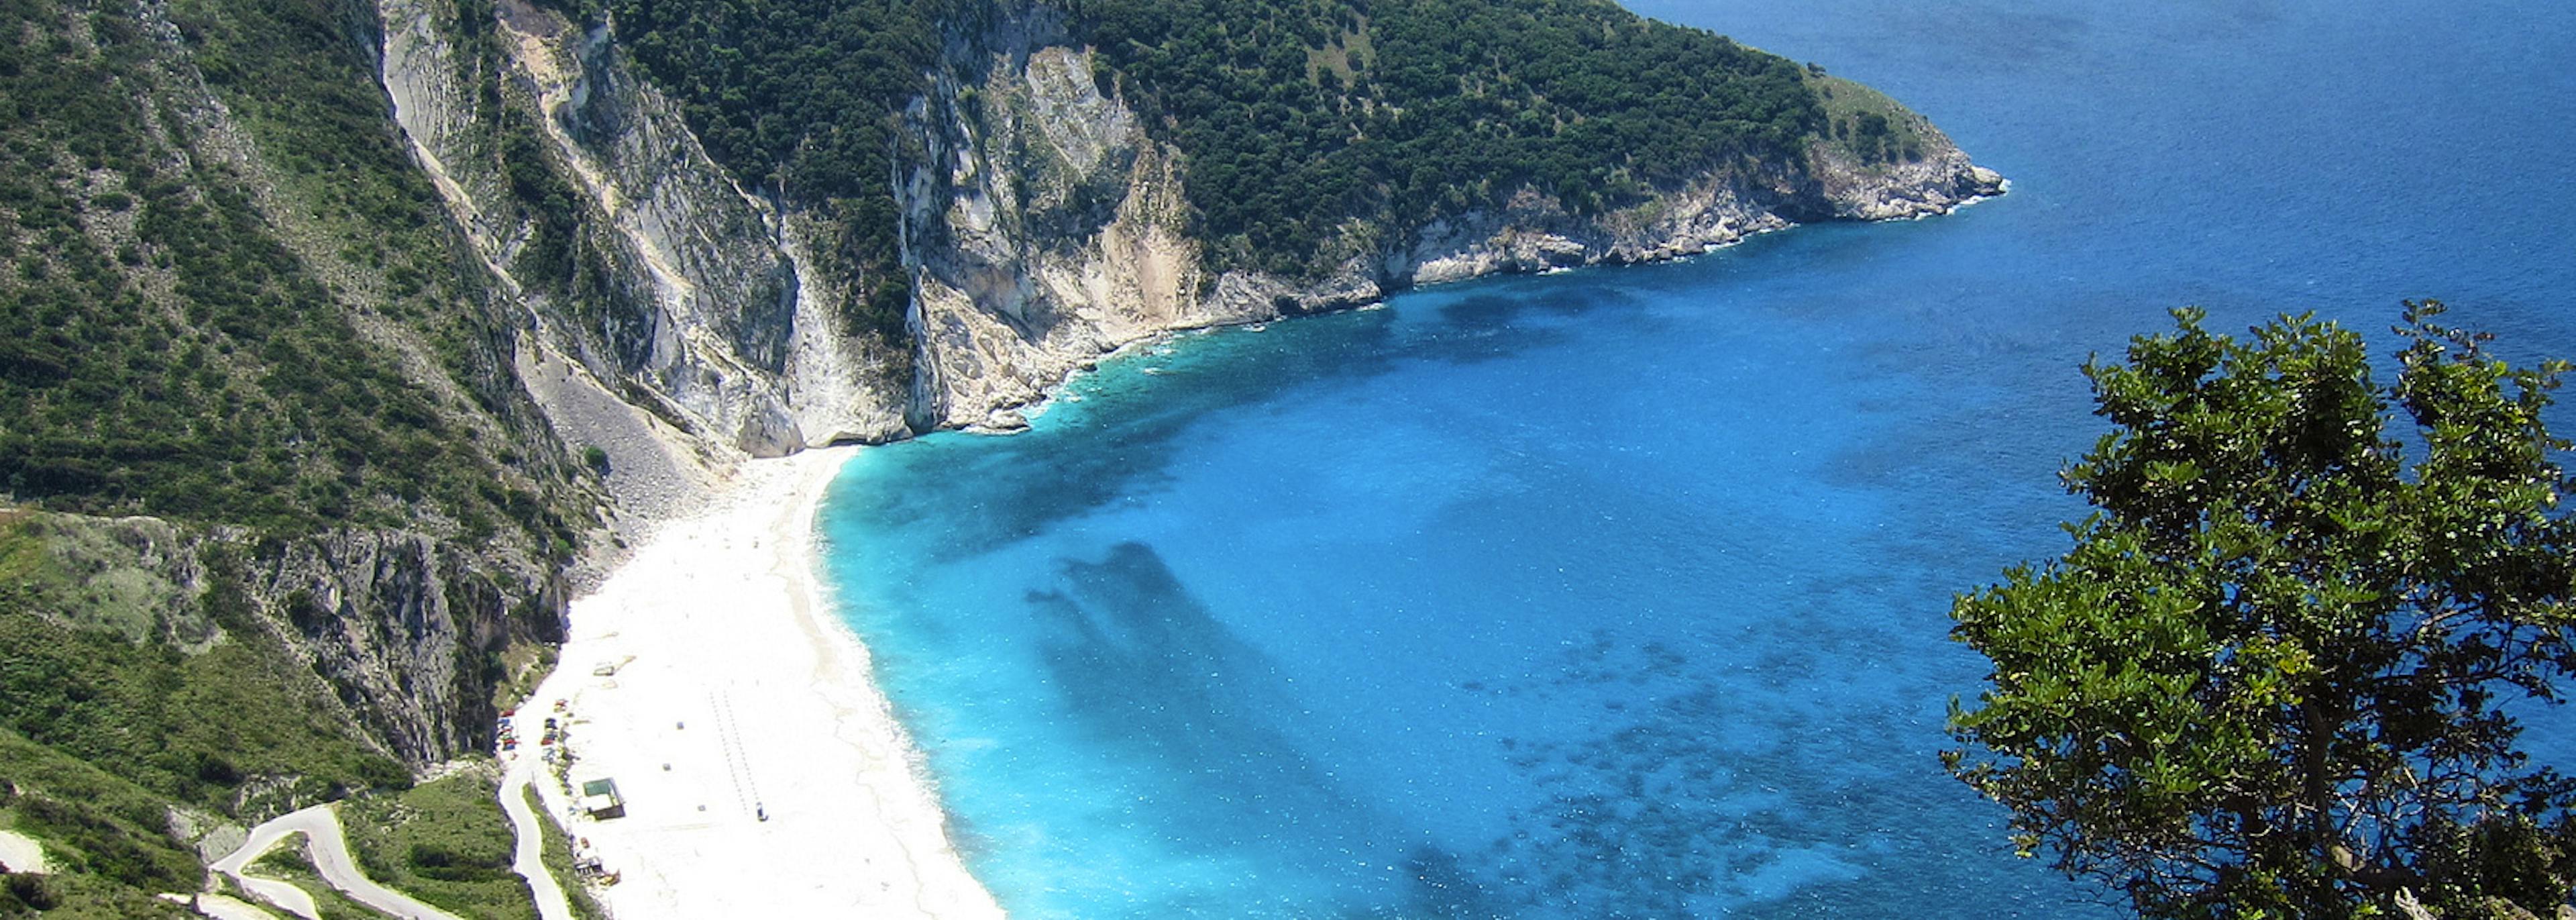 Why hiring a boat in Kefalonia?